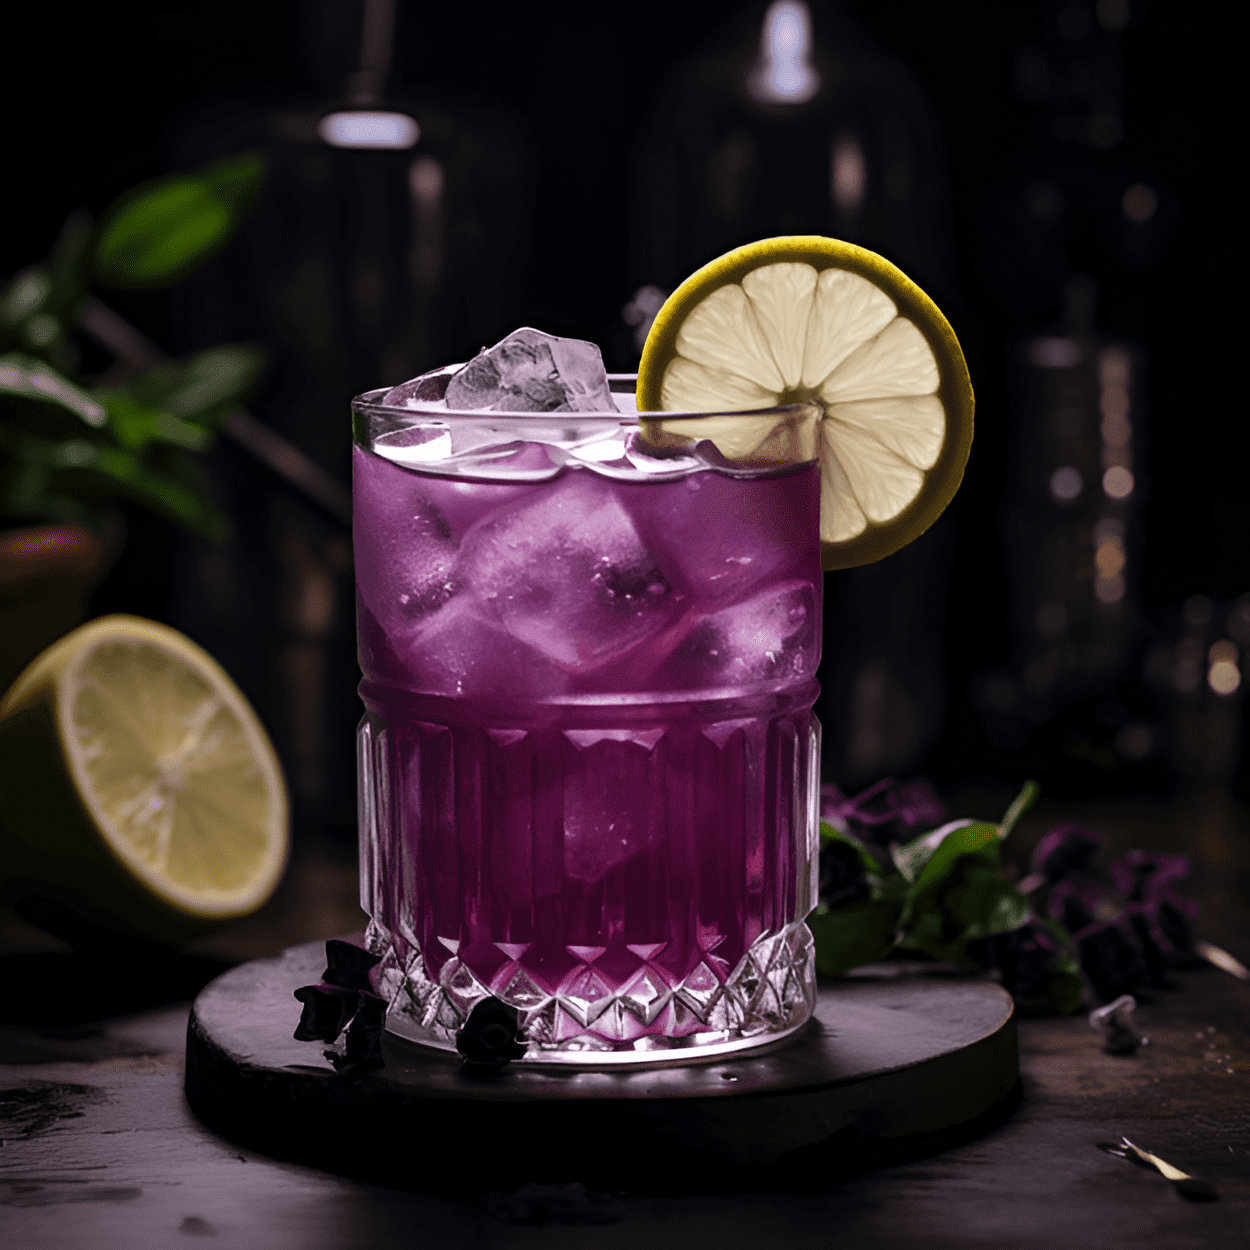 Huckleberry Hooch Cocktail Recipe - The Huckleberry Hooch is a sweet and tart cocktail with a fruity flavor. It has a refreshing taste with a hint of citrus from the lemon juice. The huckleberry syrup gives it a unique berry flavor that is both sweet and slightly tart. The vodka adds a bit of a kick without overpowering the other flavors.